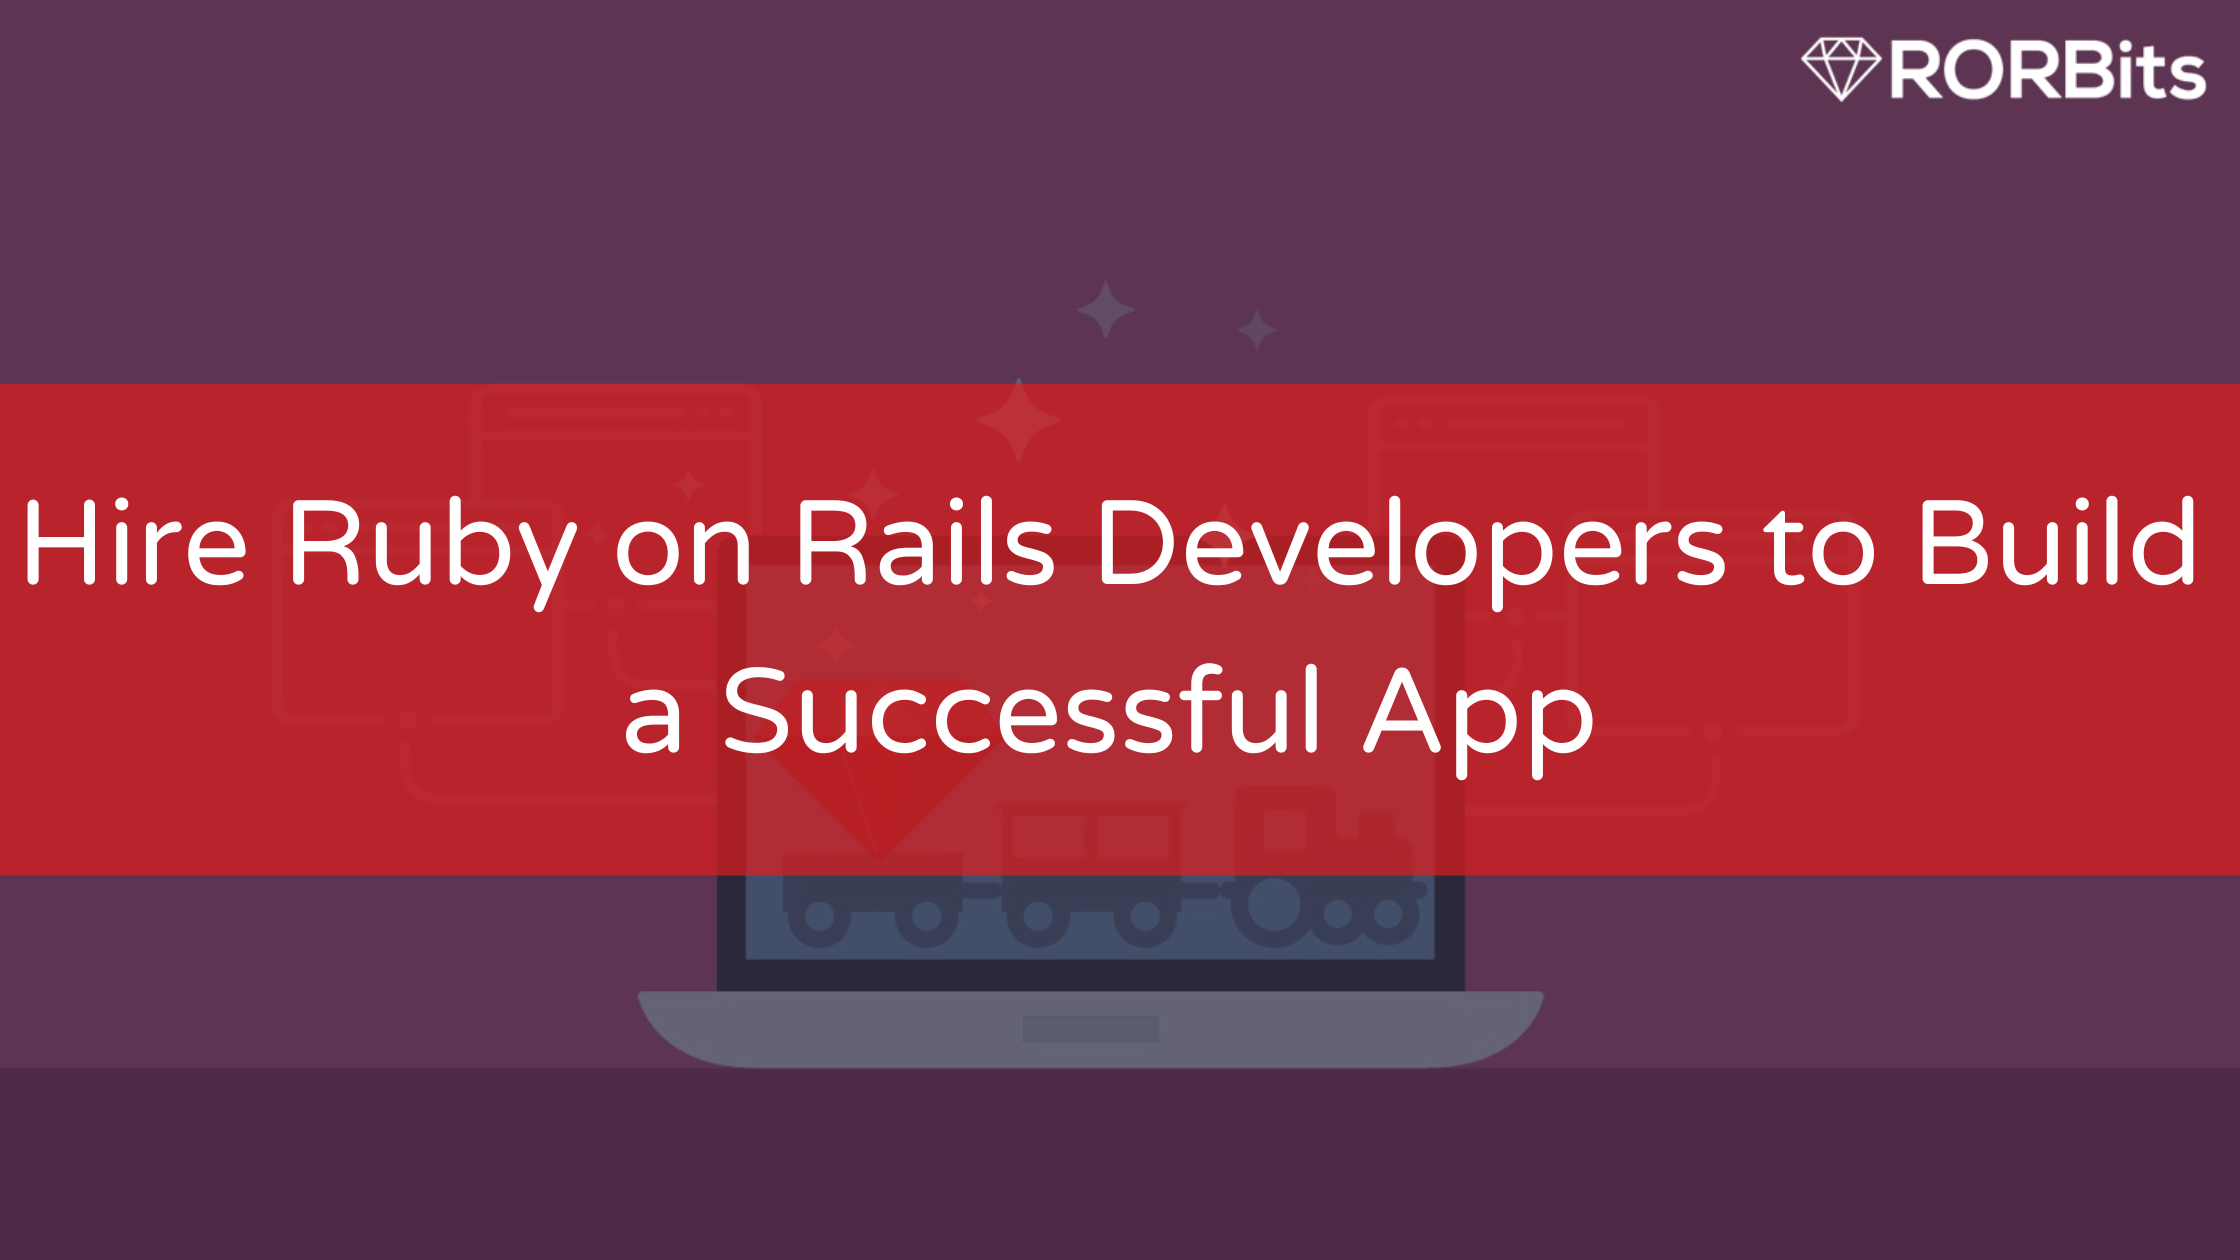 Hire Ruby on Rails Developers to Build a Successful App